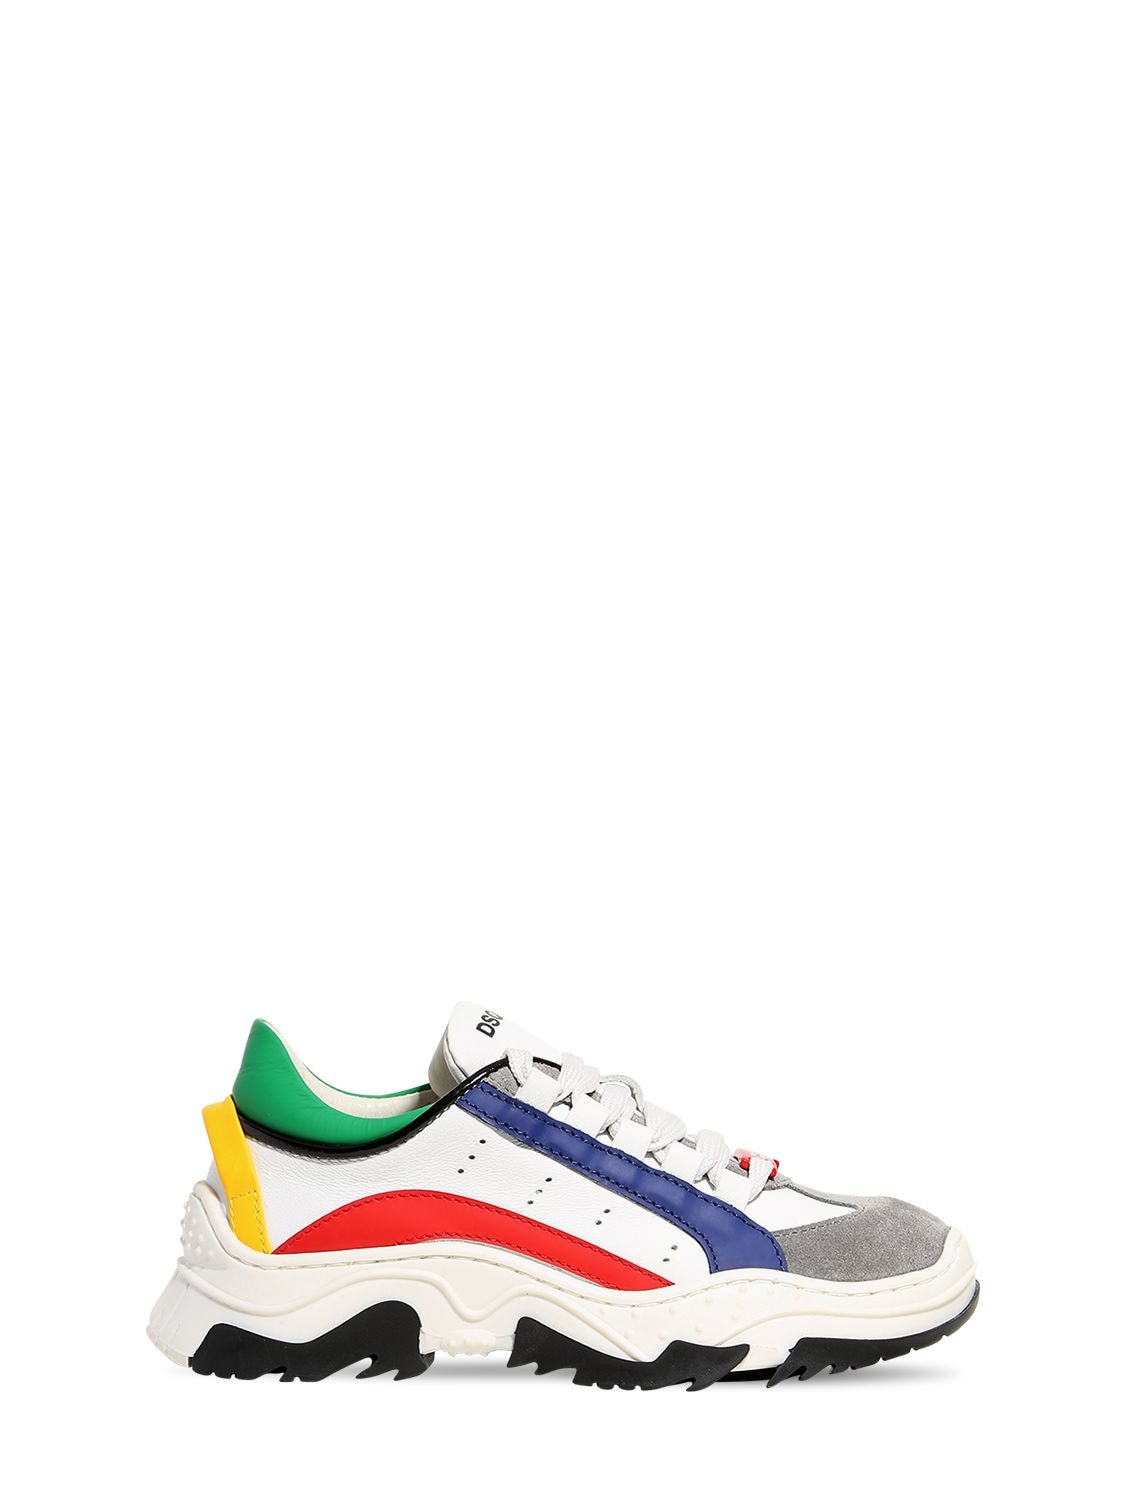 DSQUARED2 SUEDE & LEATHER LACE-UP SNEAKERS,72I91X069-VKFSIDE1